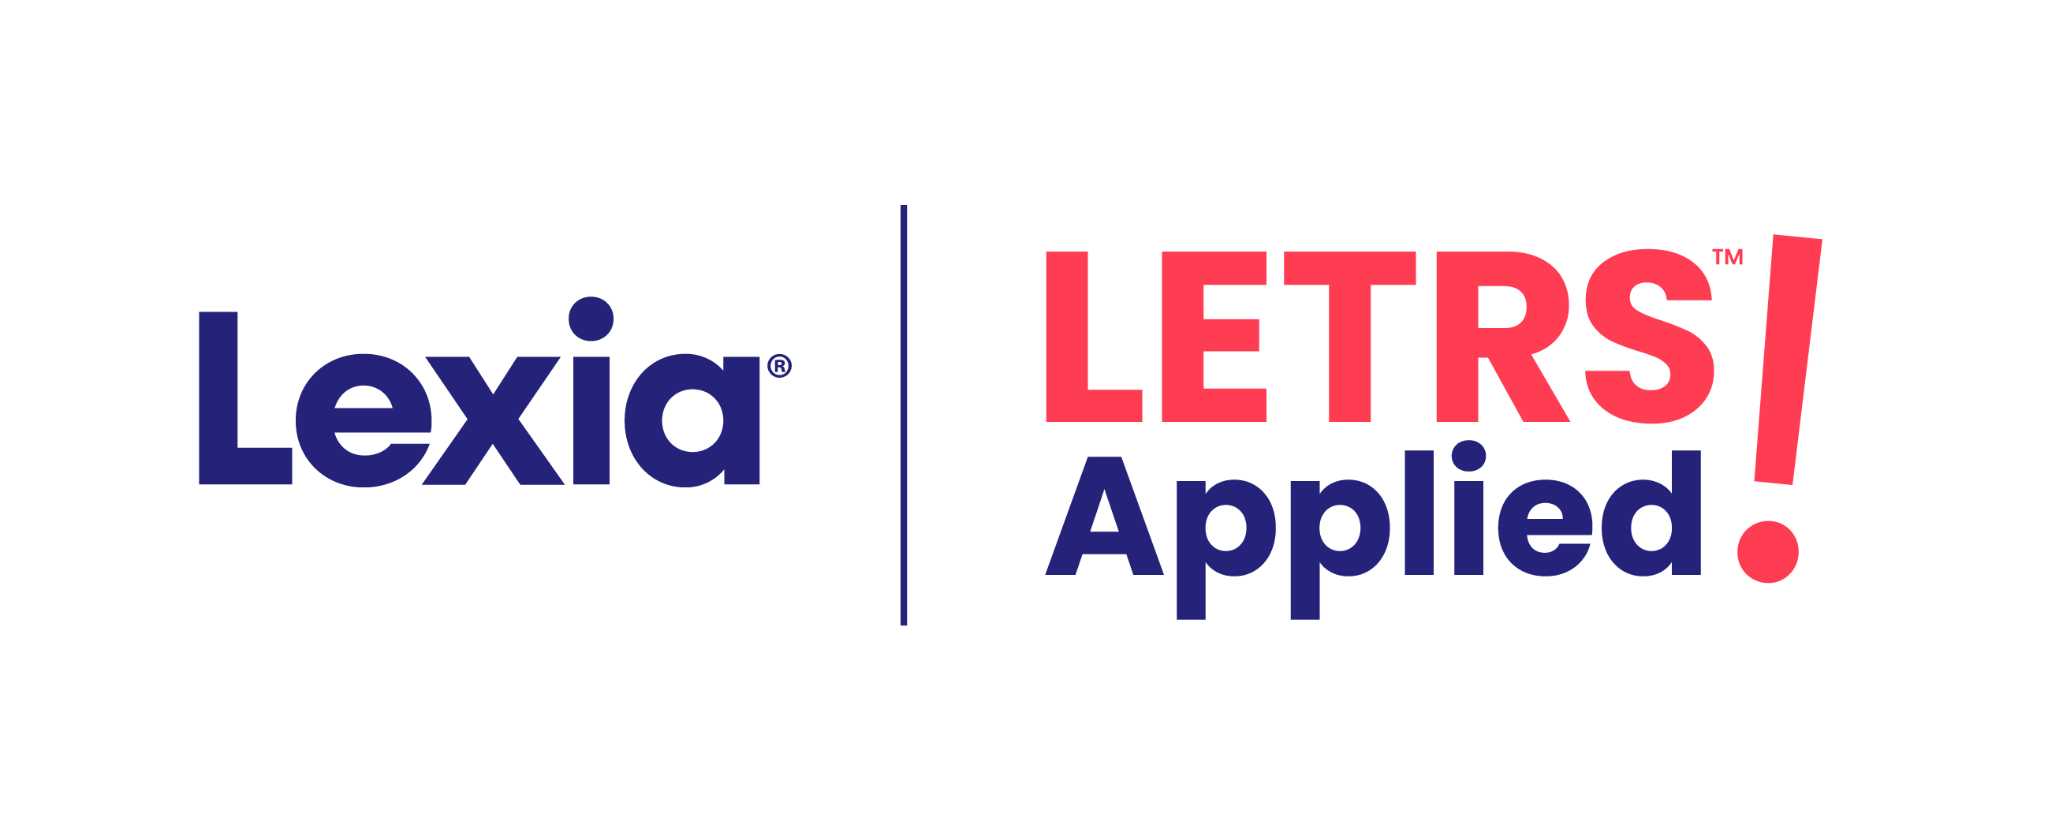 LETRS Applied! by Lexia Logo